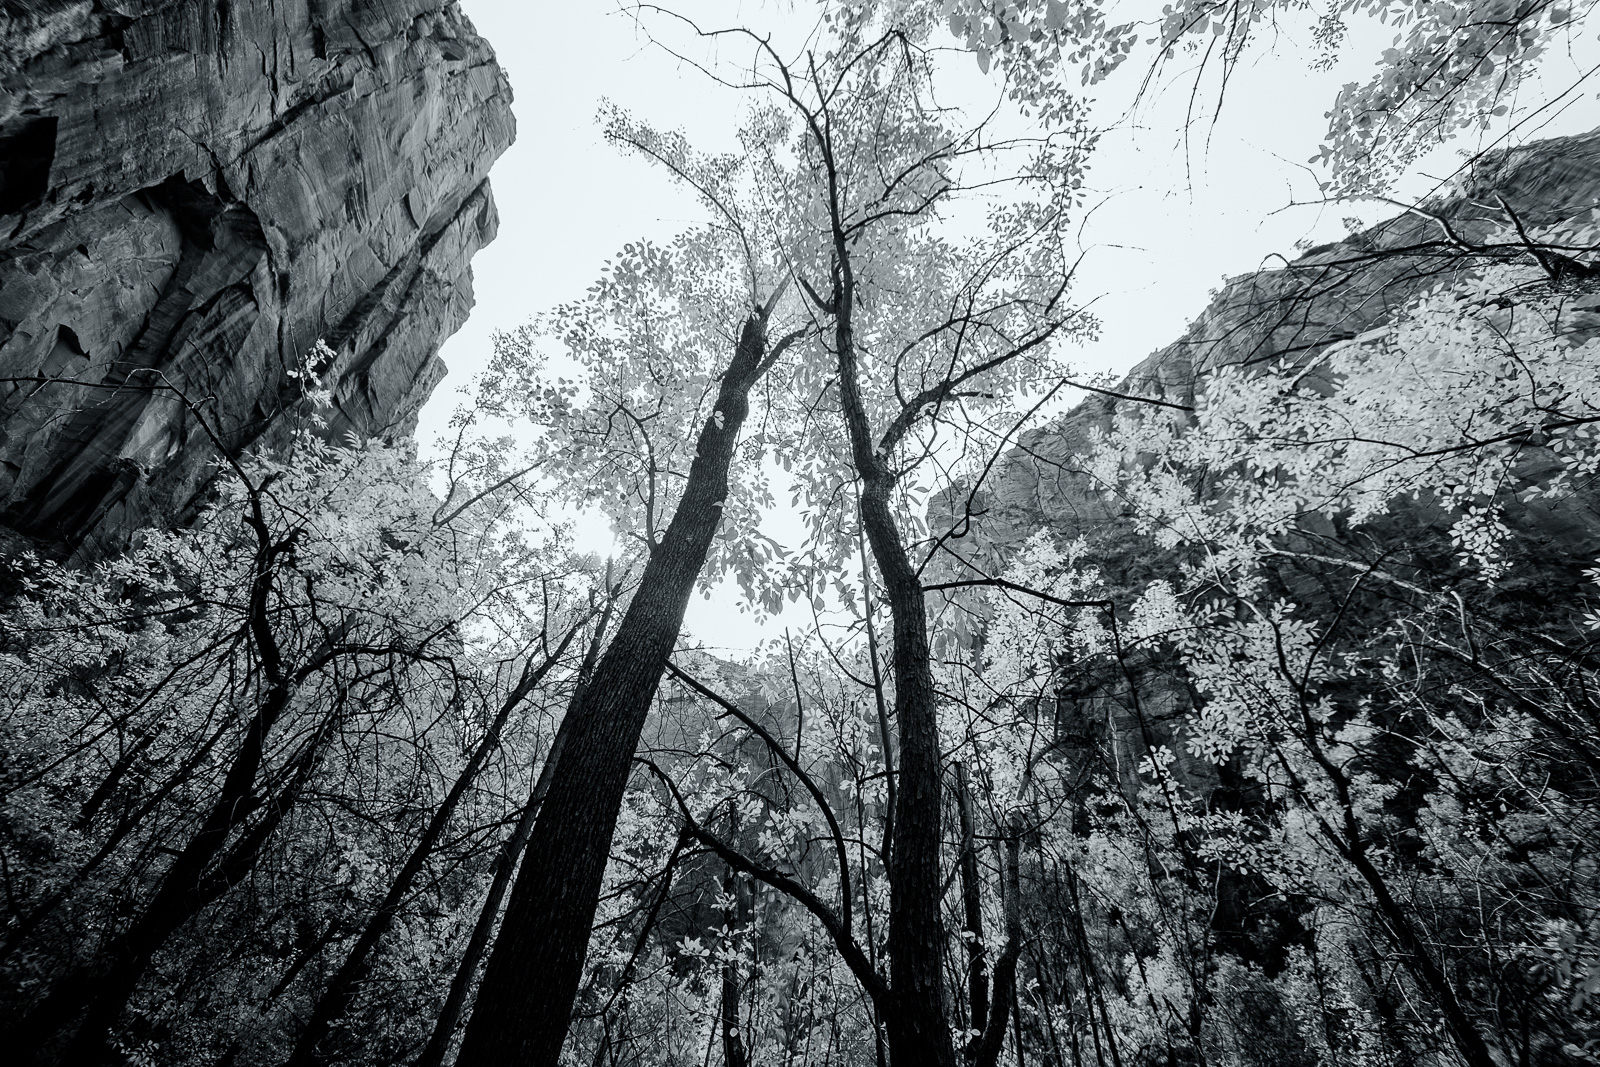 Zion National Park in Black and White